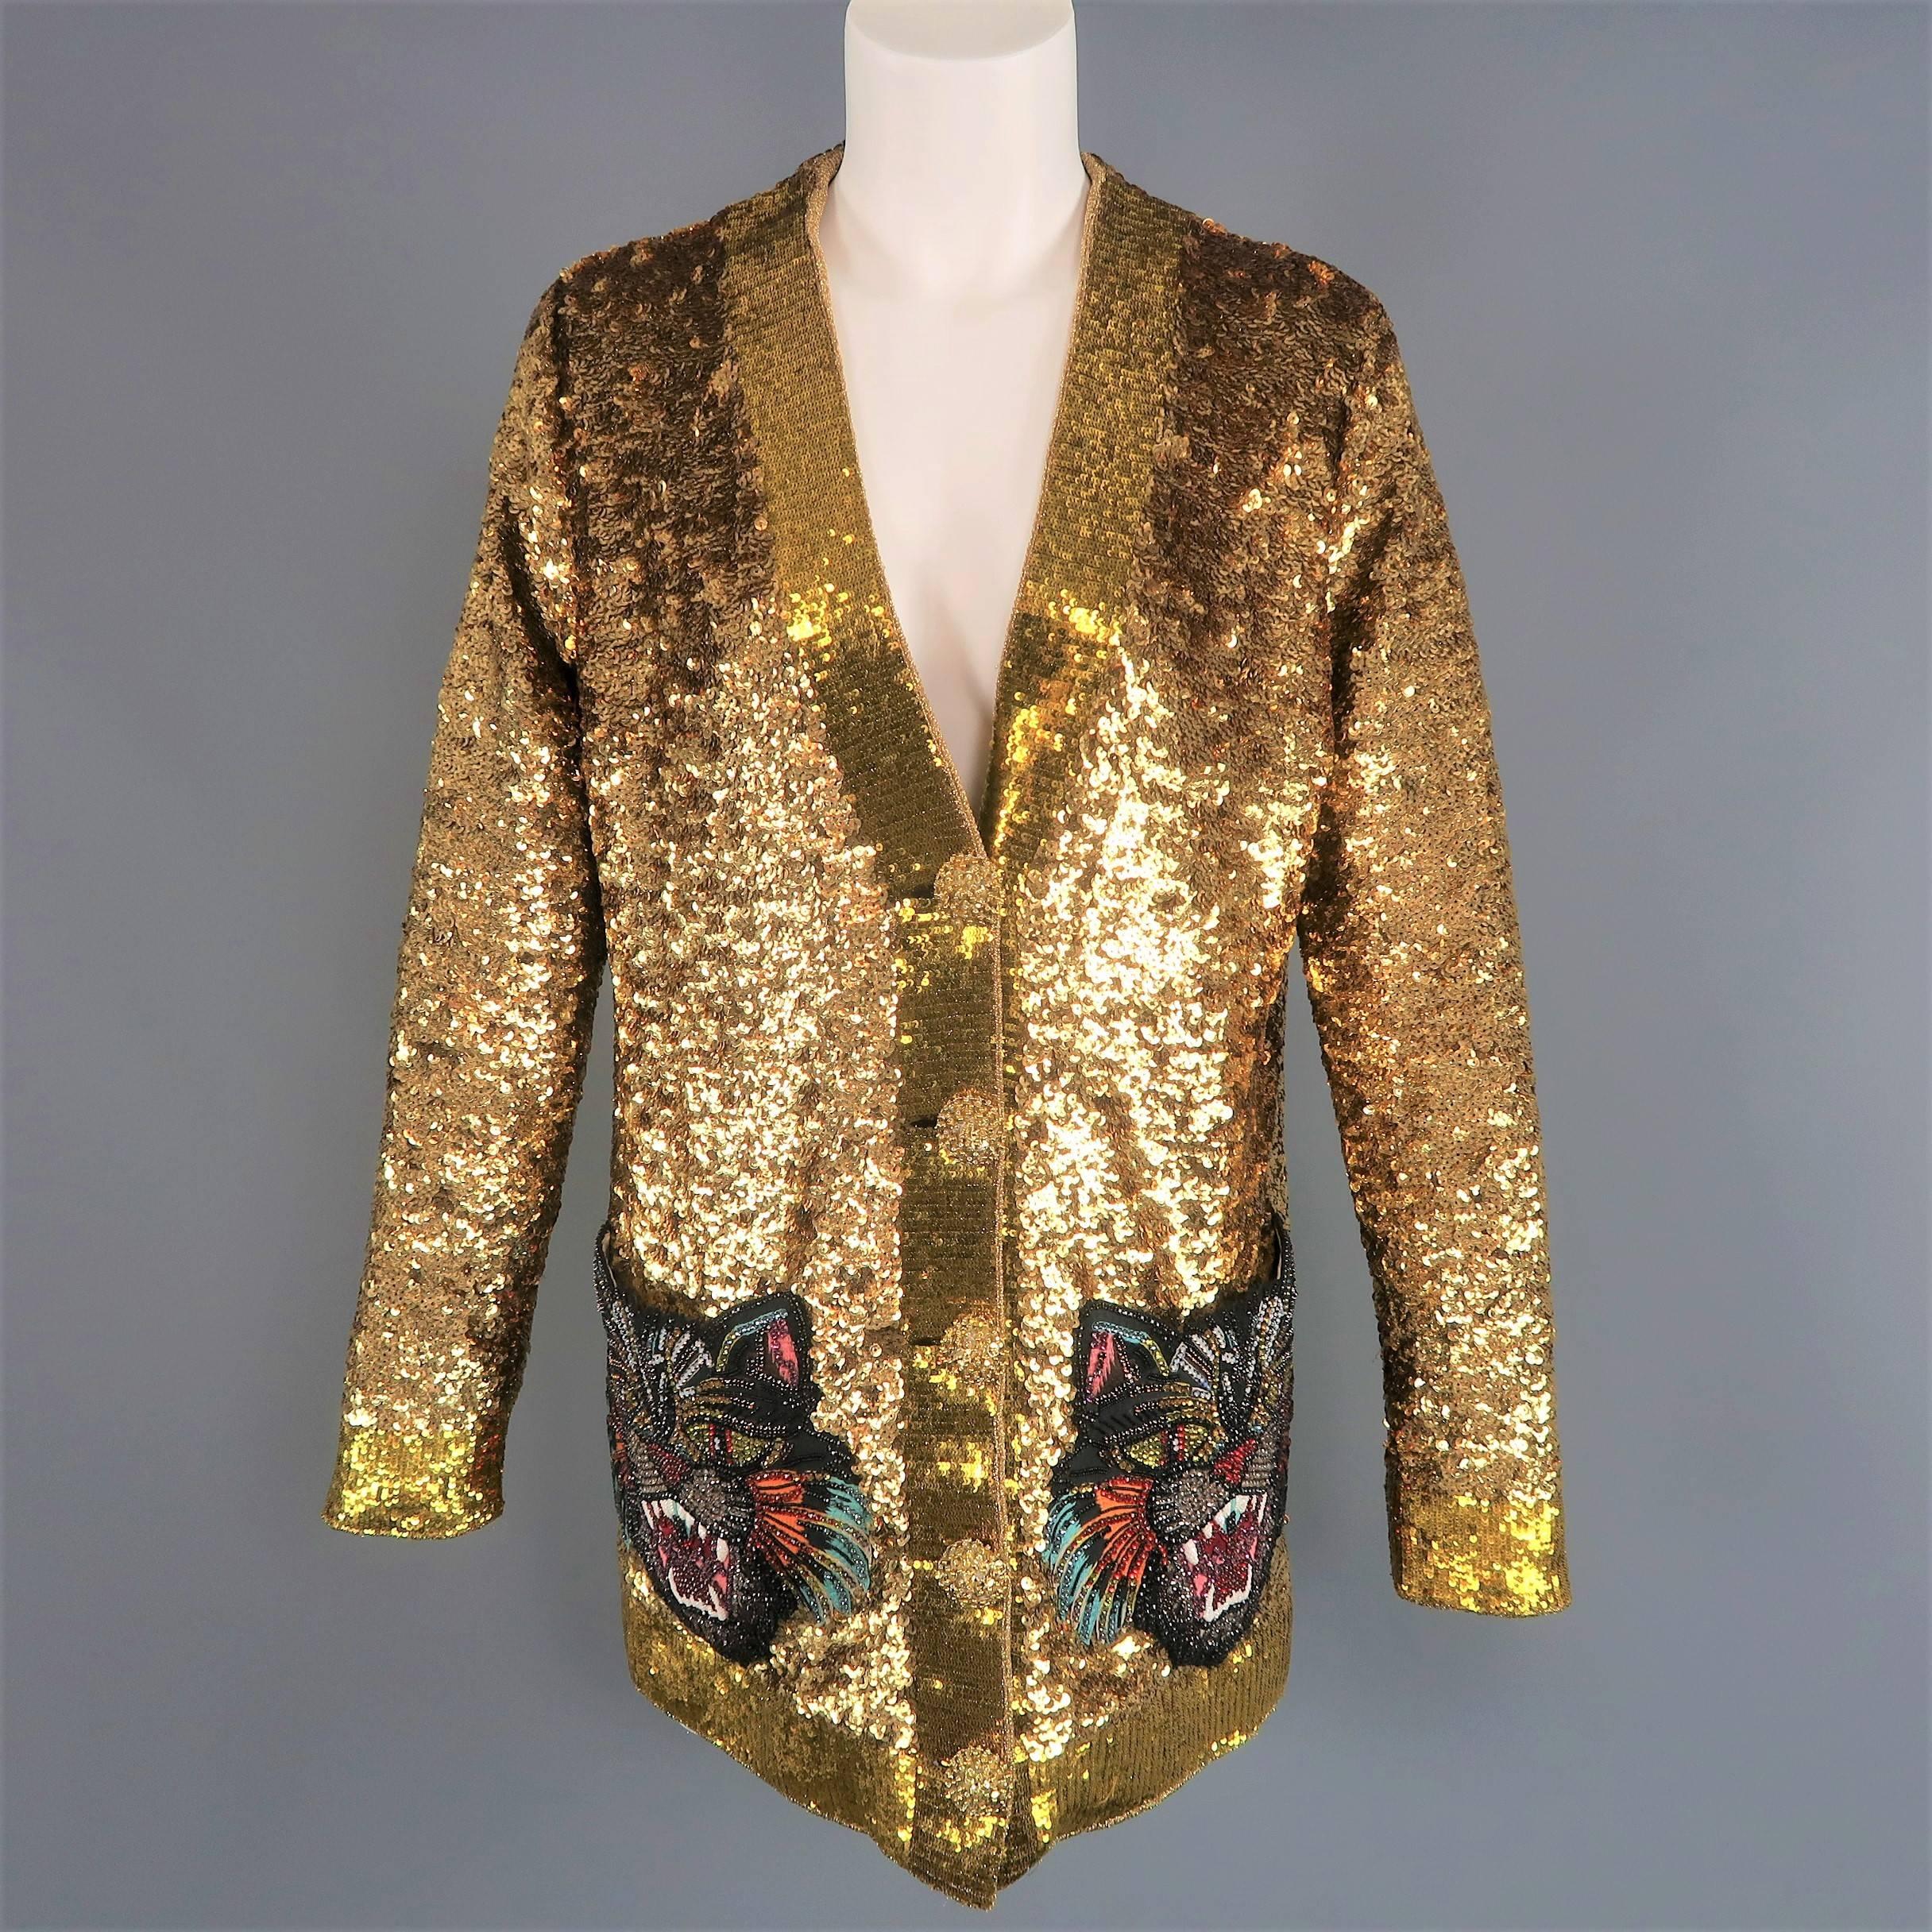 Gucci Spring 2017 Collection cardigan jacket comes in gold sequin embellished silk with yellow gold sequin trim, V neckline, five beaded button closure front, oversized multi colored rhinestone studded black tiger pockets, and teal and pink lion